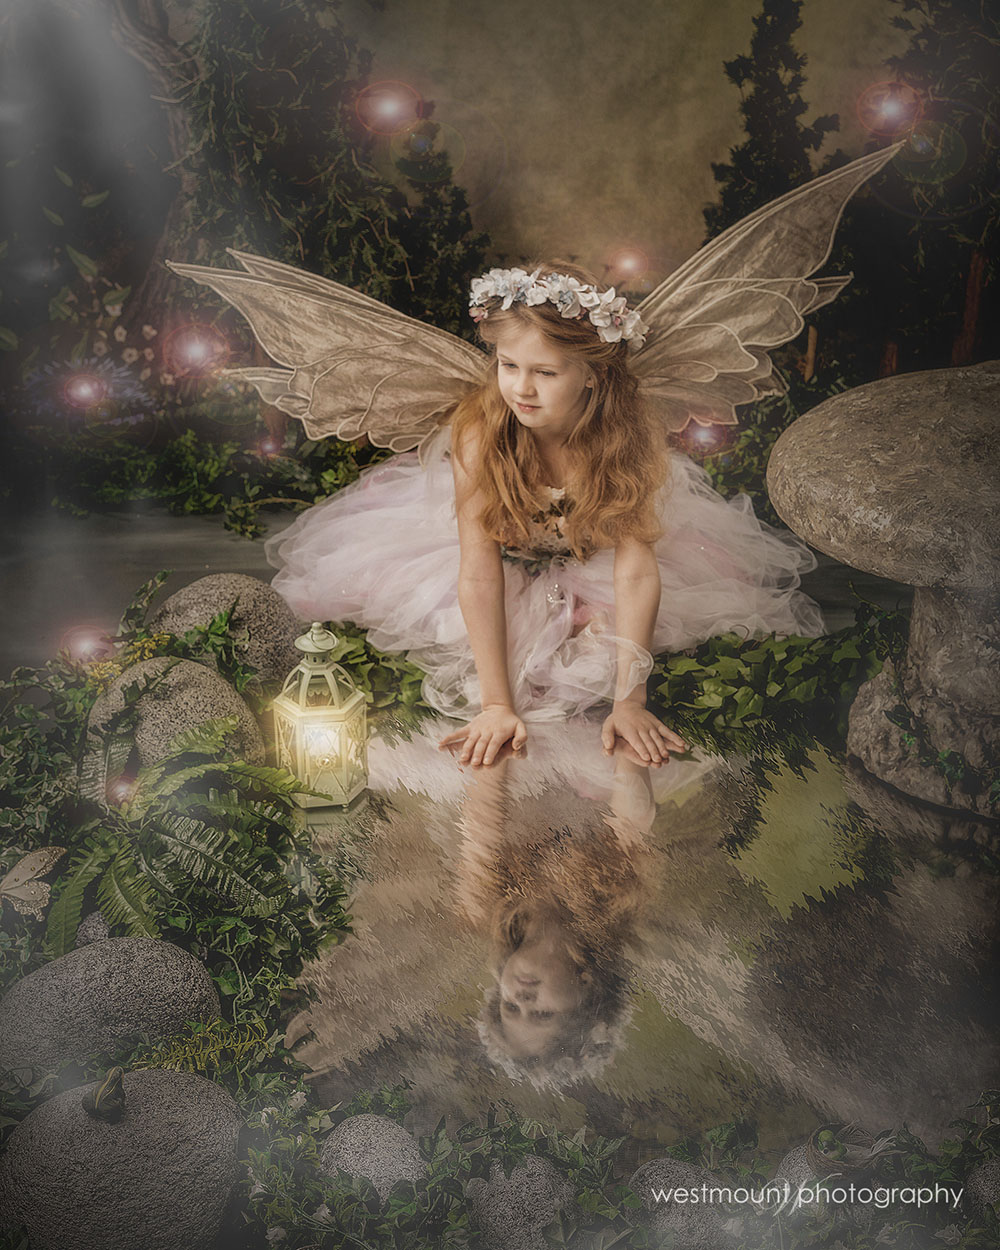 Some fairy day images….